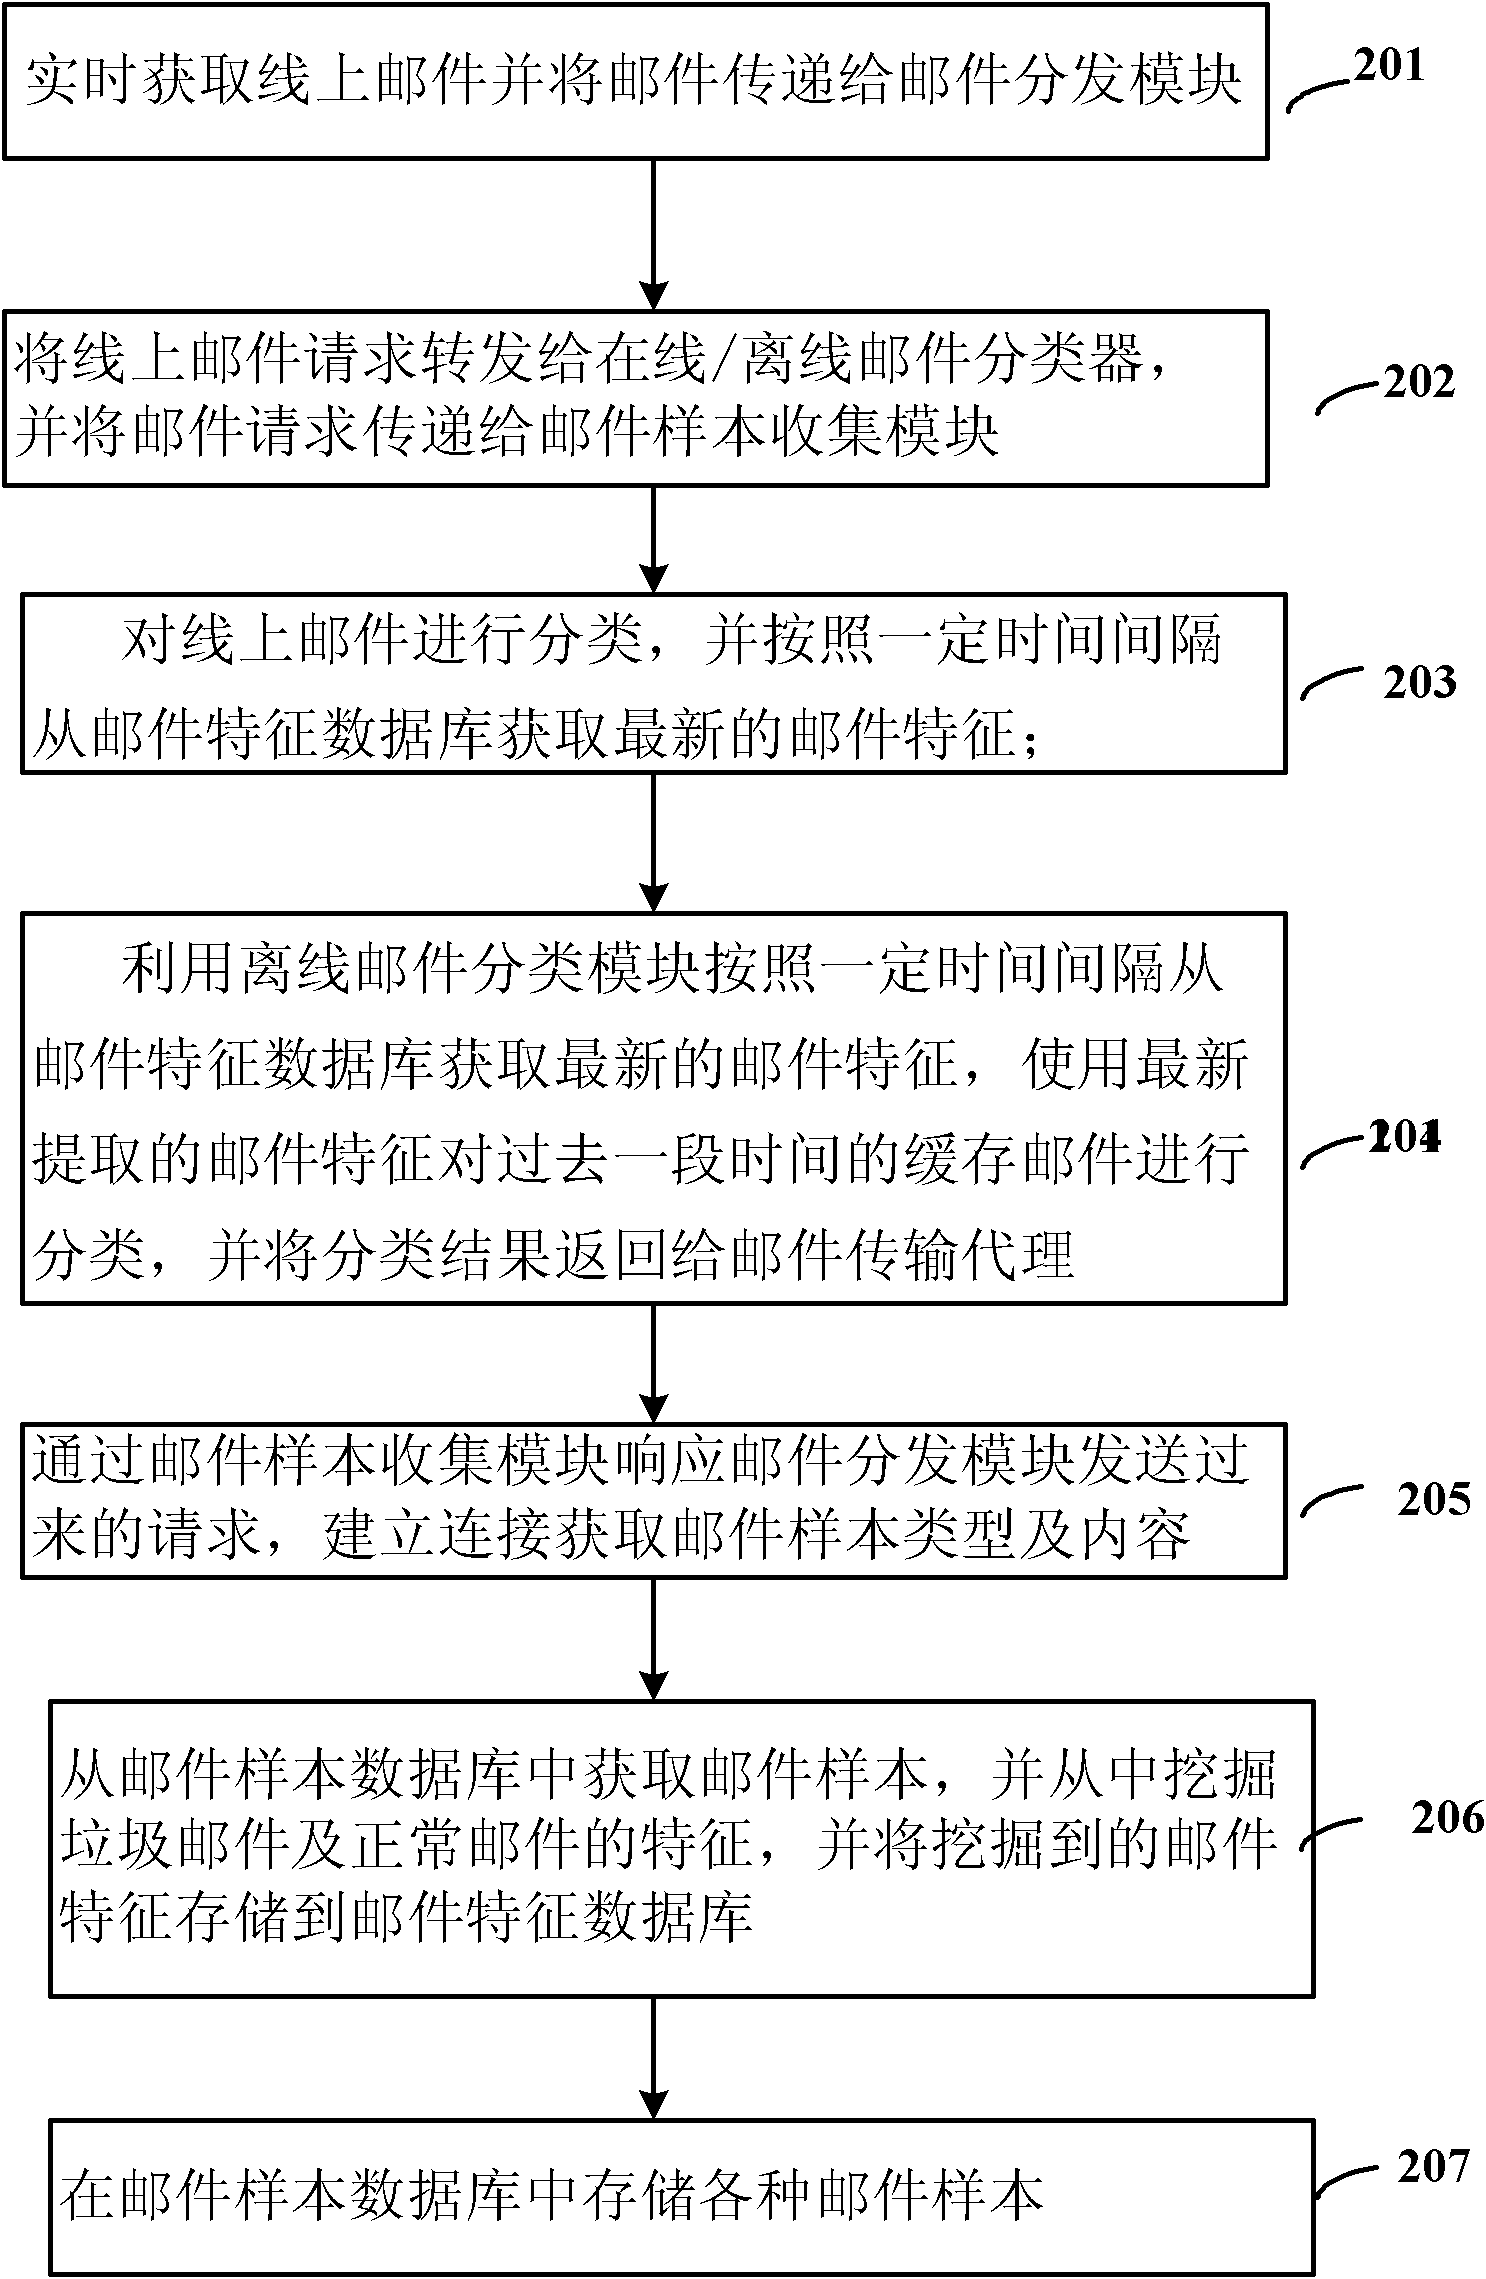 Anti-spam gateway system and method